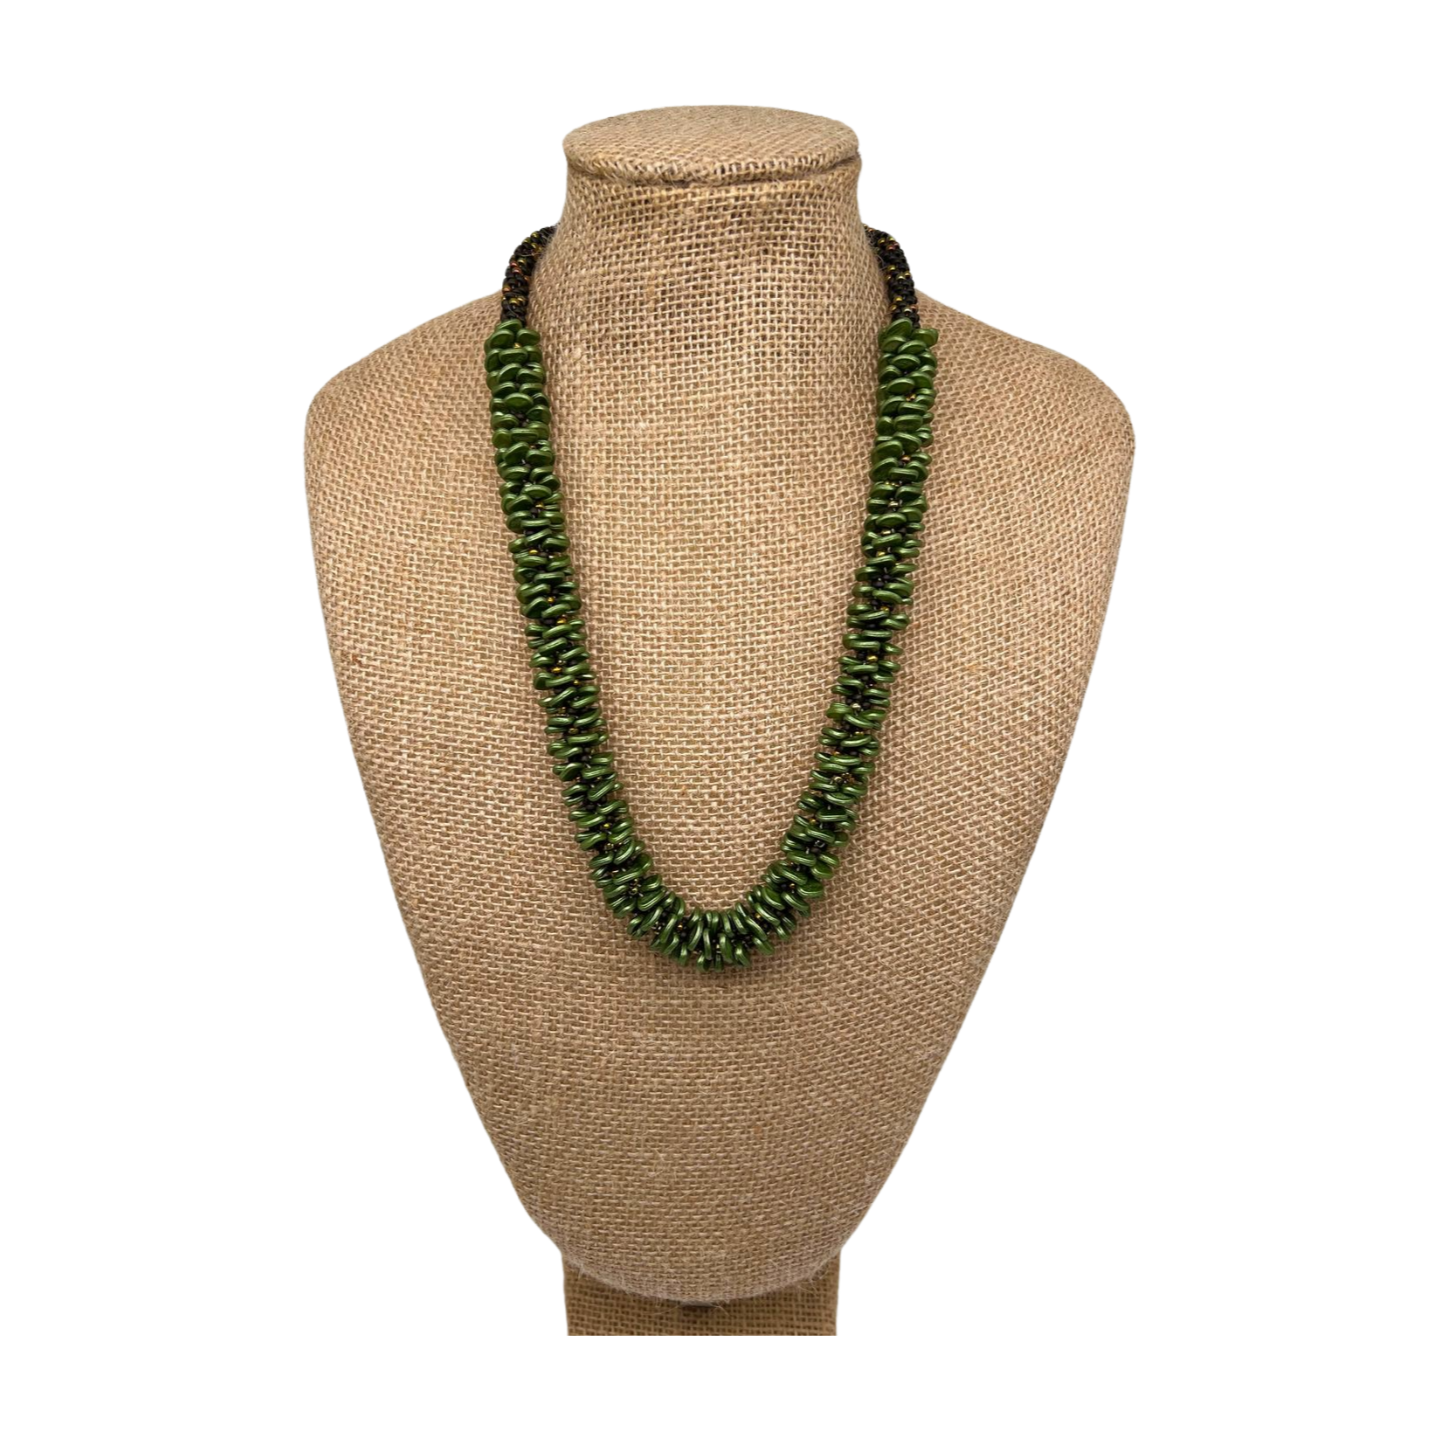 Metallic Green (Rare) Orchid Lei with gold magnetic end caps- 24”